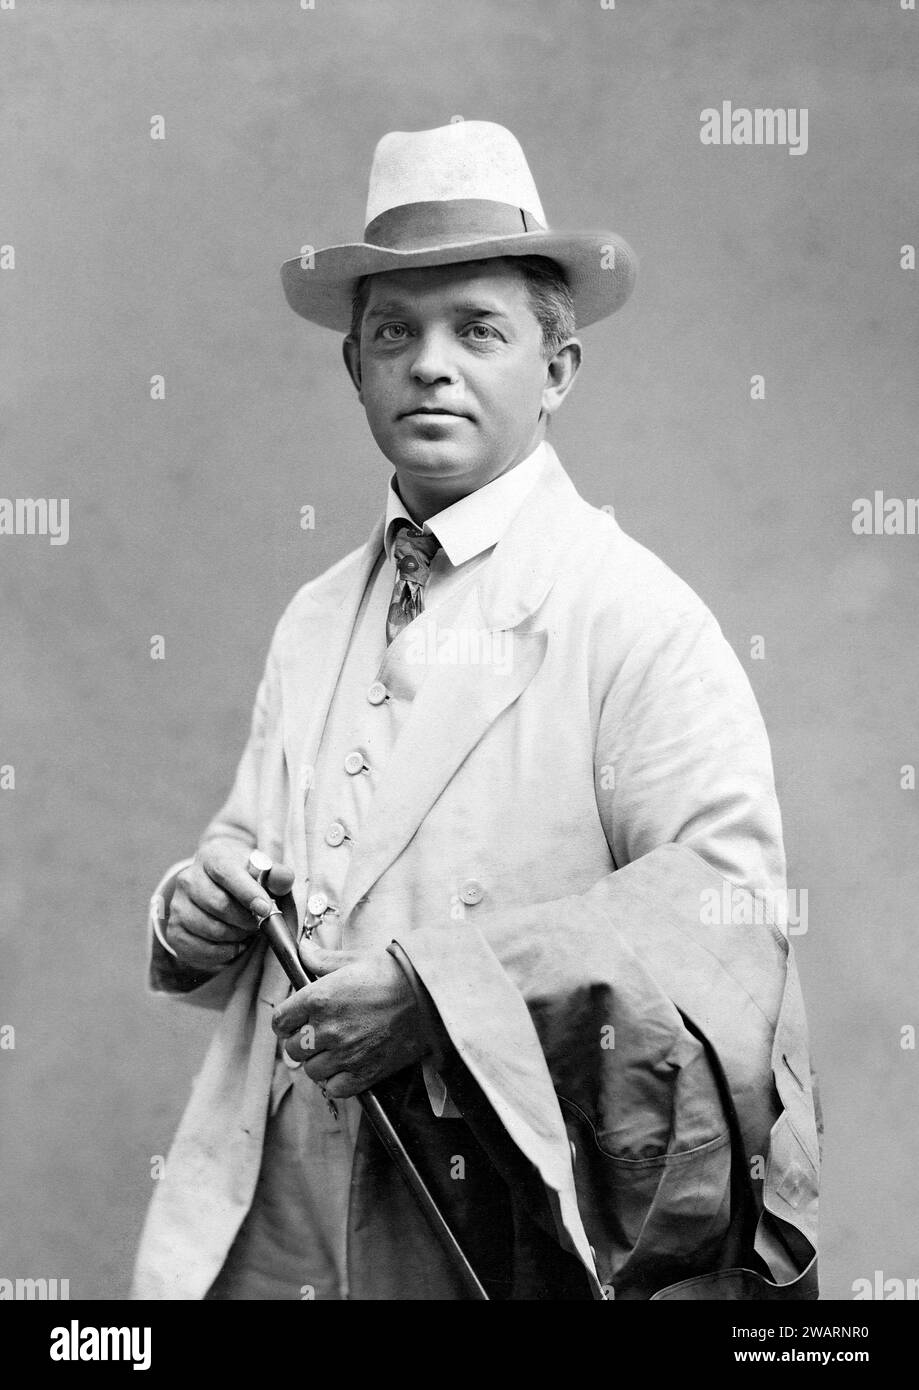 Carl Nielsen. Portrait of the Danish composer, conductor and violinist, Carl August Nielsen (1865-1931), c. 1908 Stock Photo